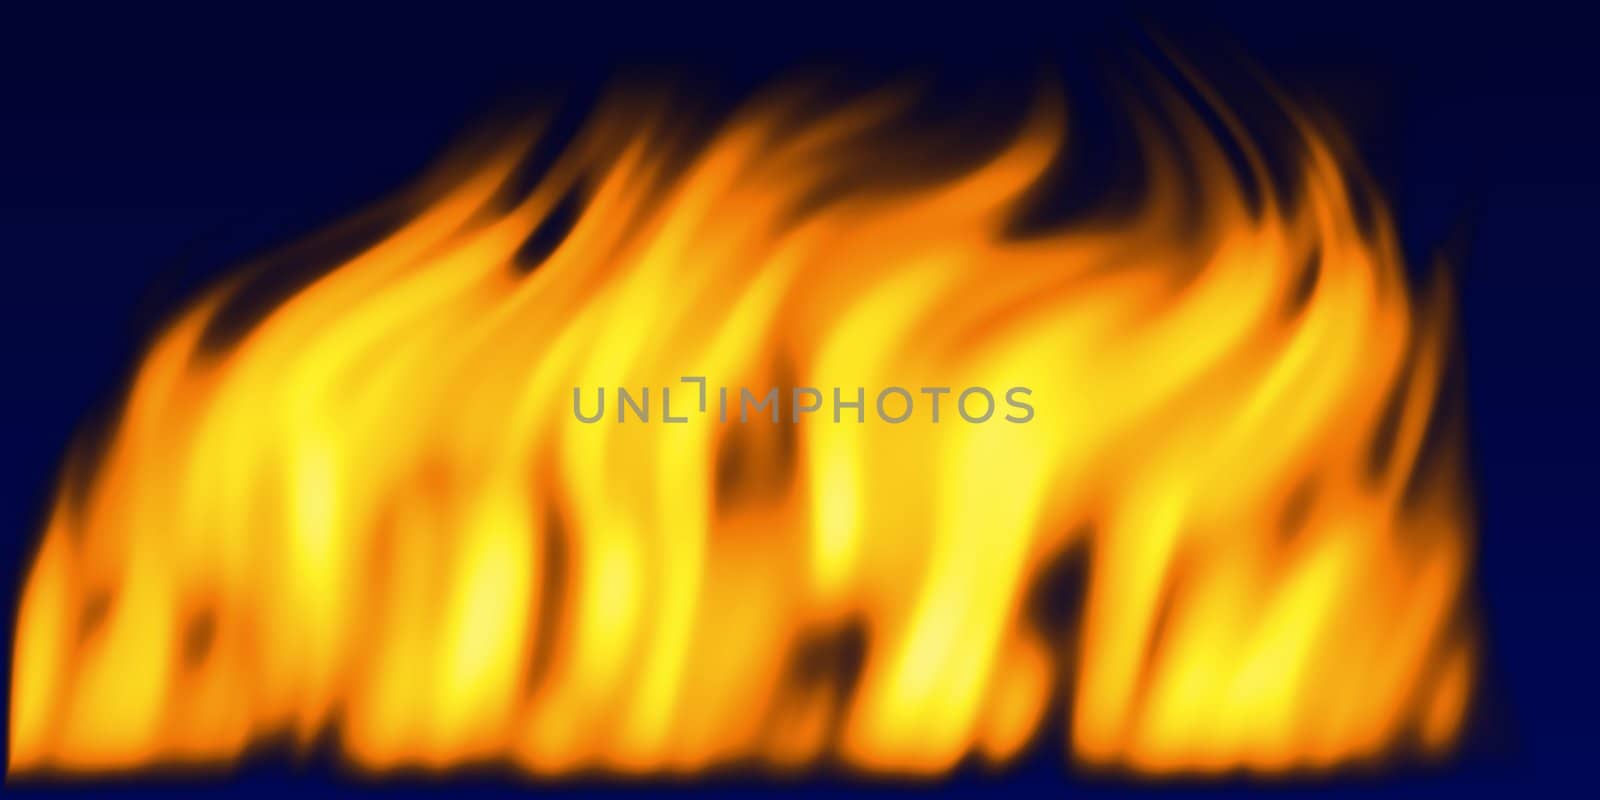 an illustration of an abstract fire background